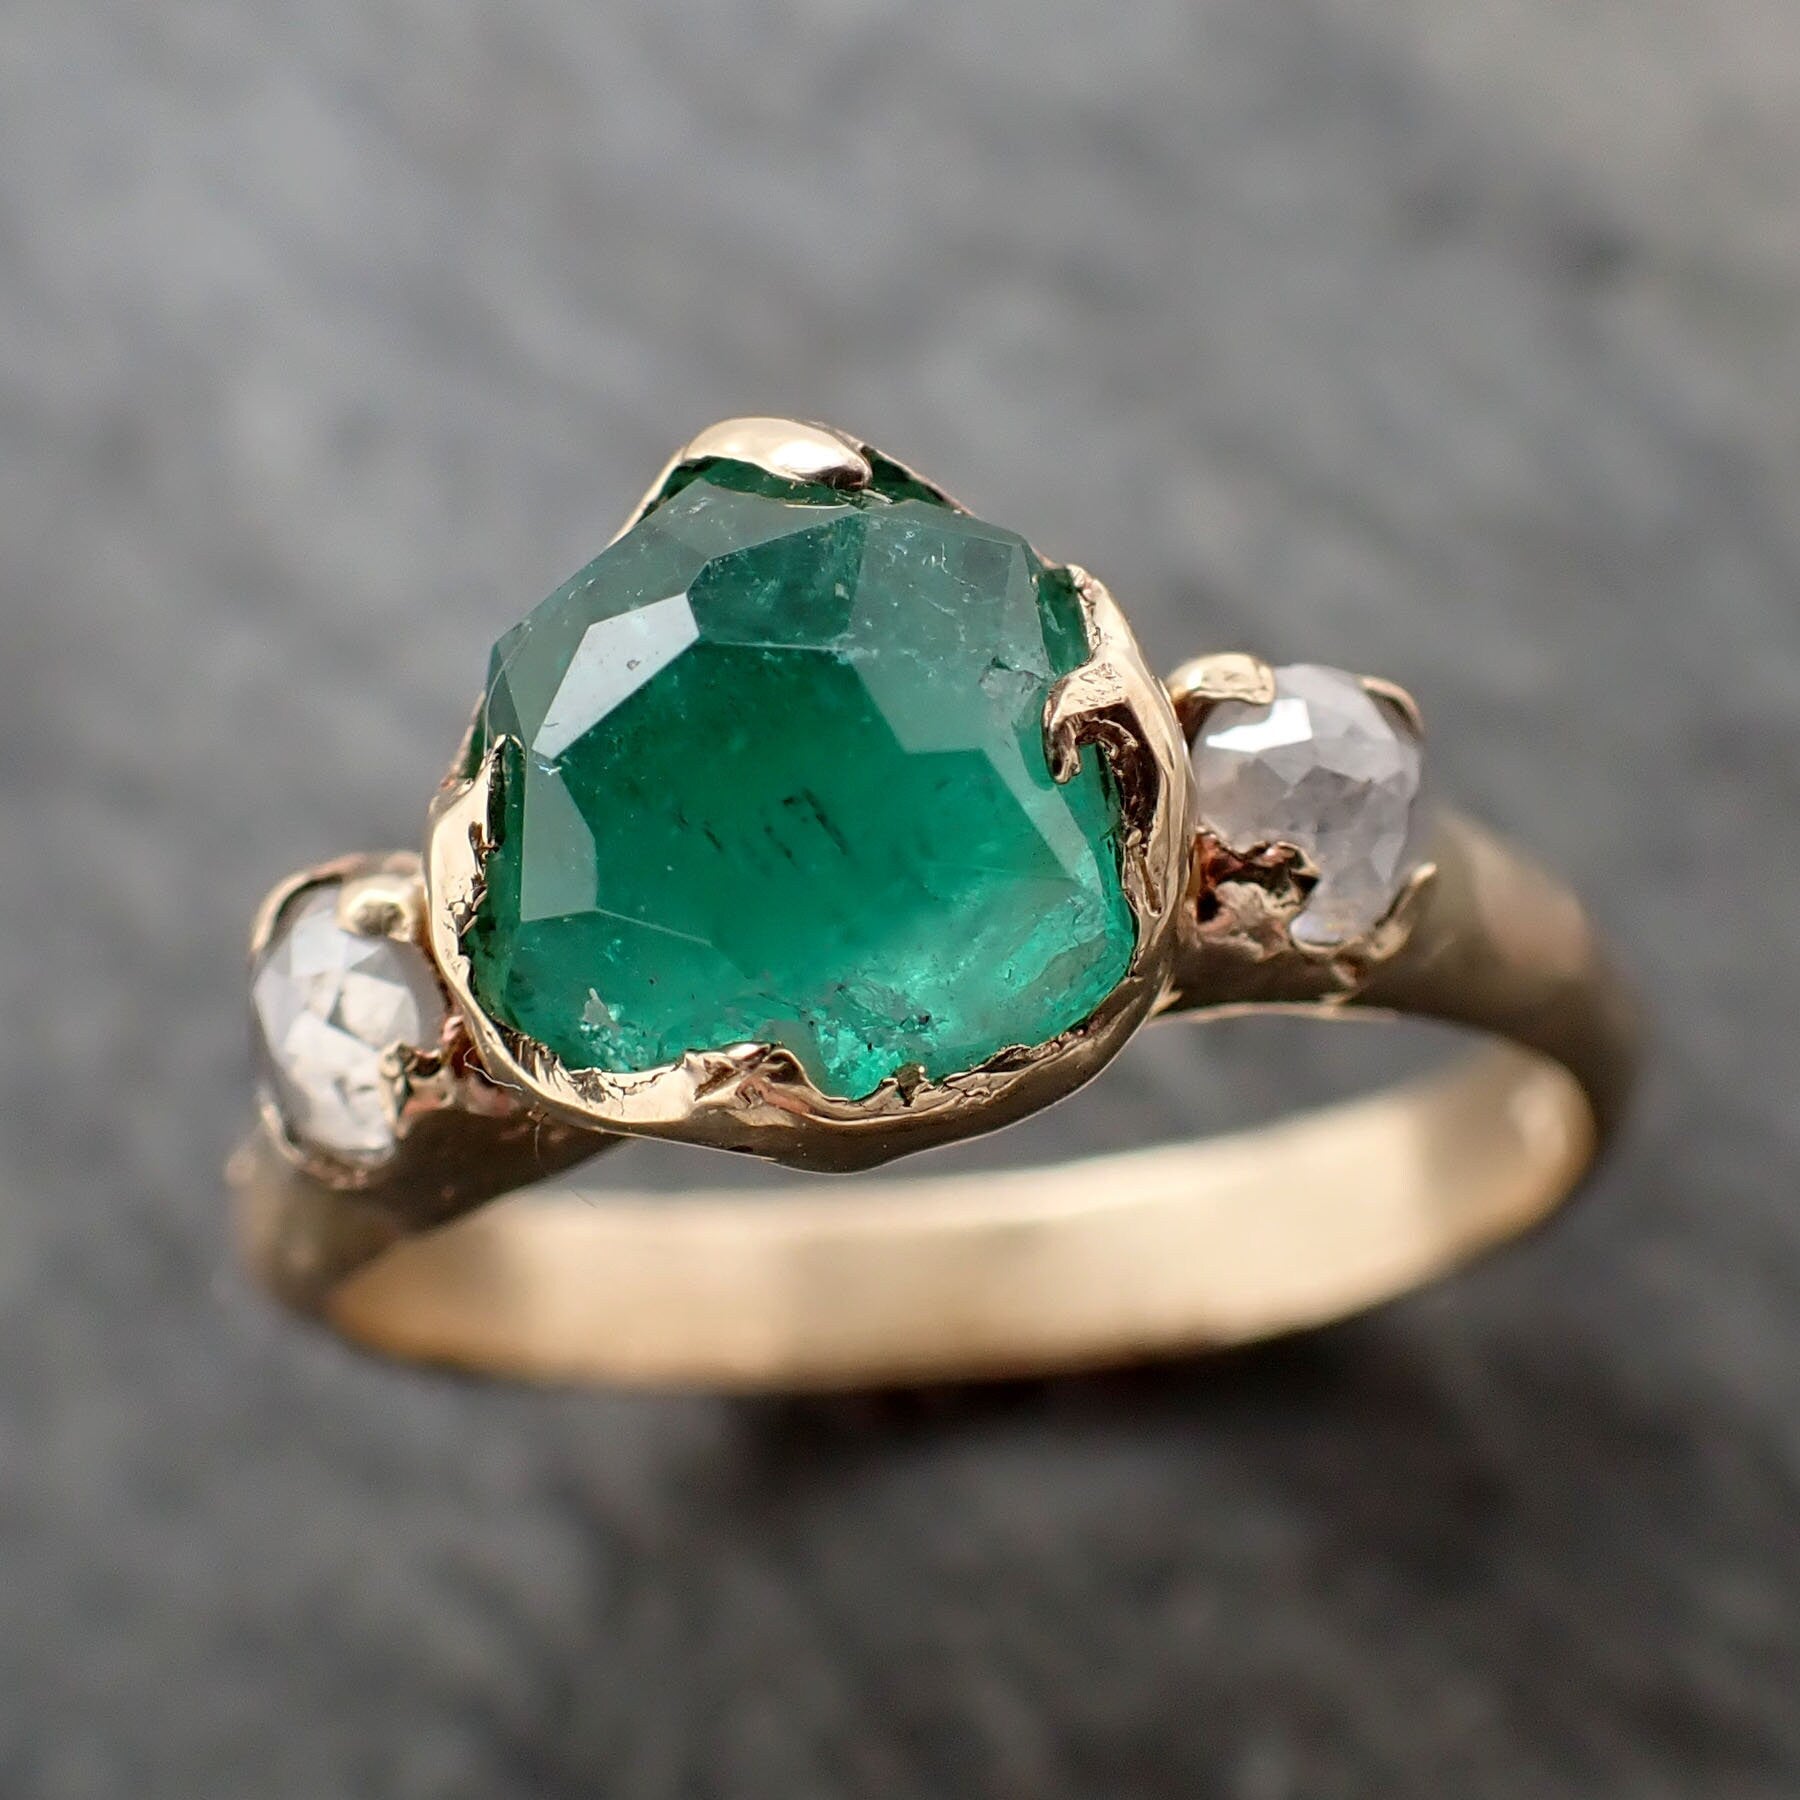 Partially faceted Three Stone Emerald rough diamond Engagement Ring 14k gold Multi stone Wedding Birthstone Ring byAngeline 3241